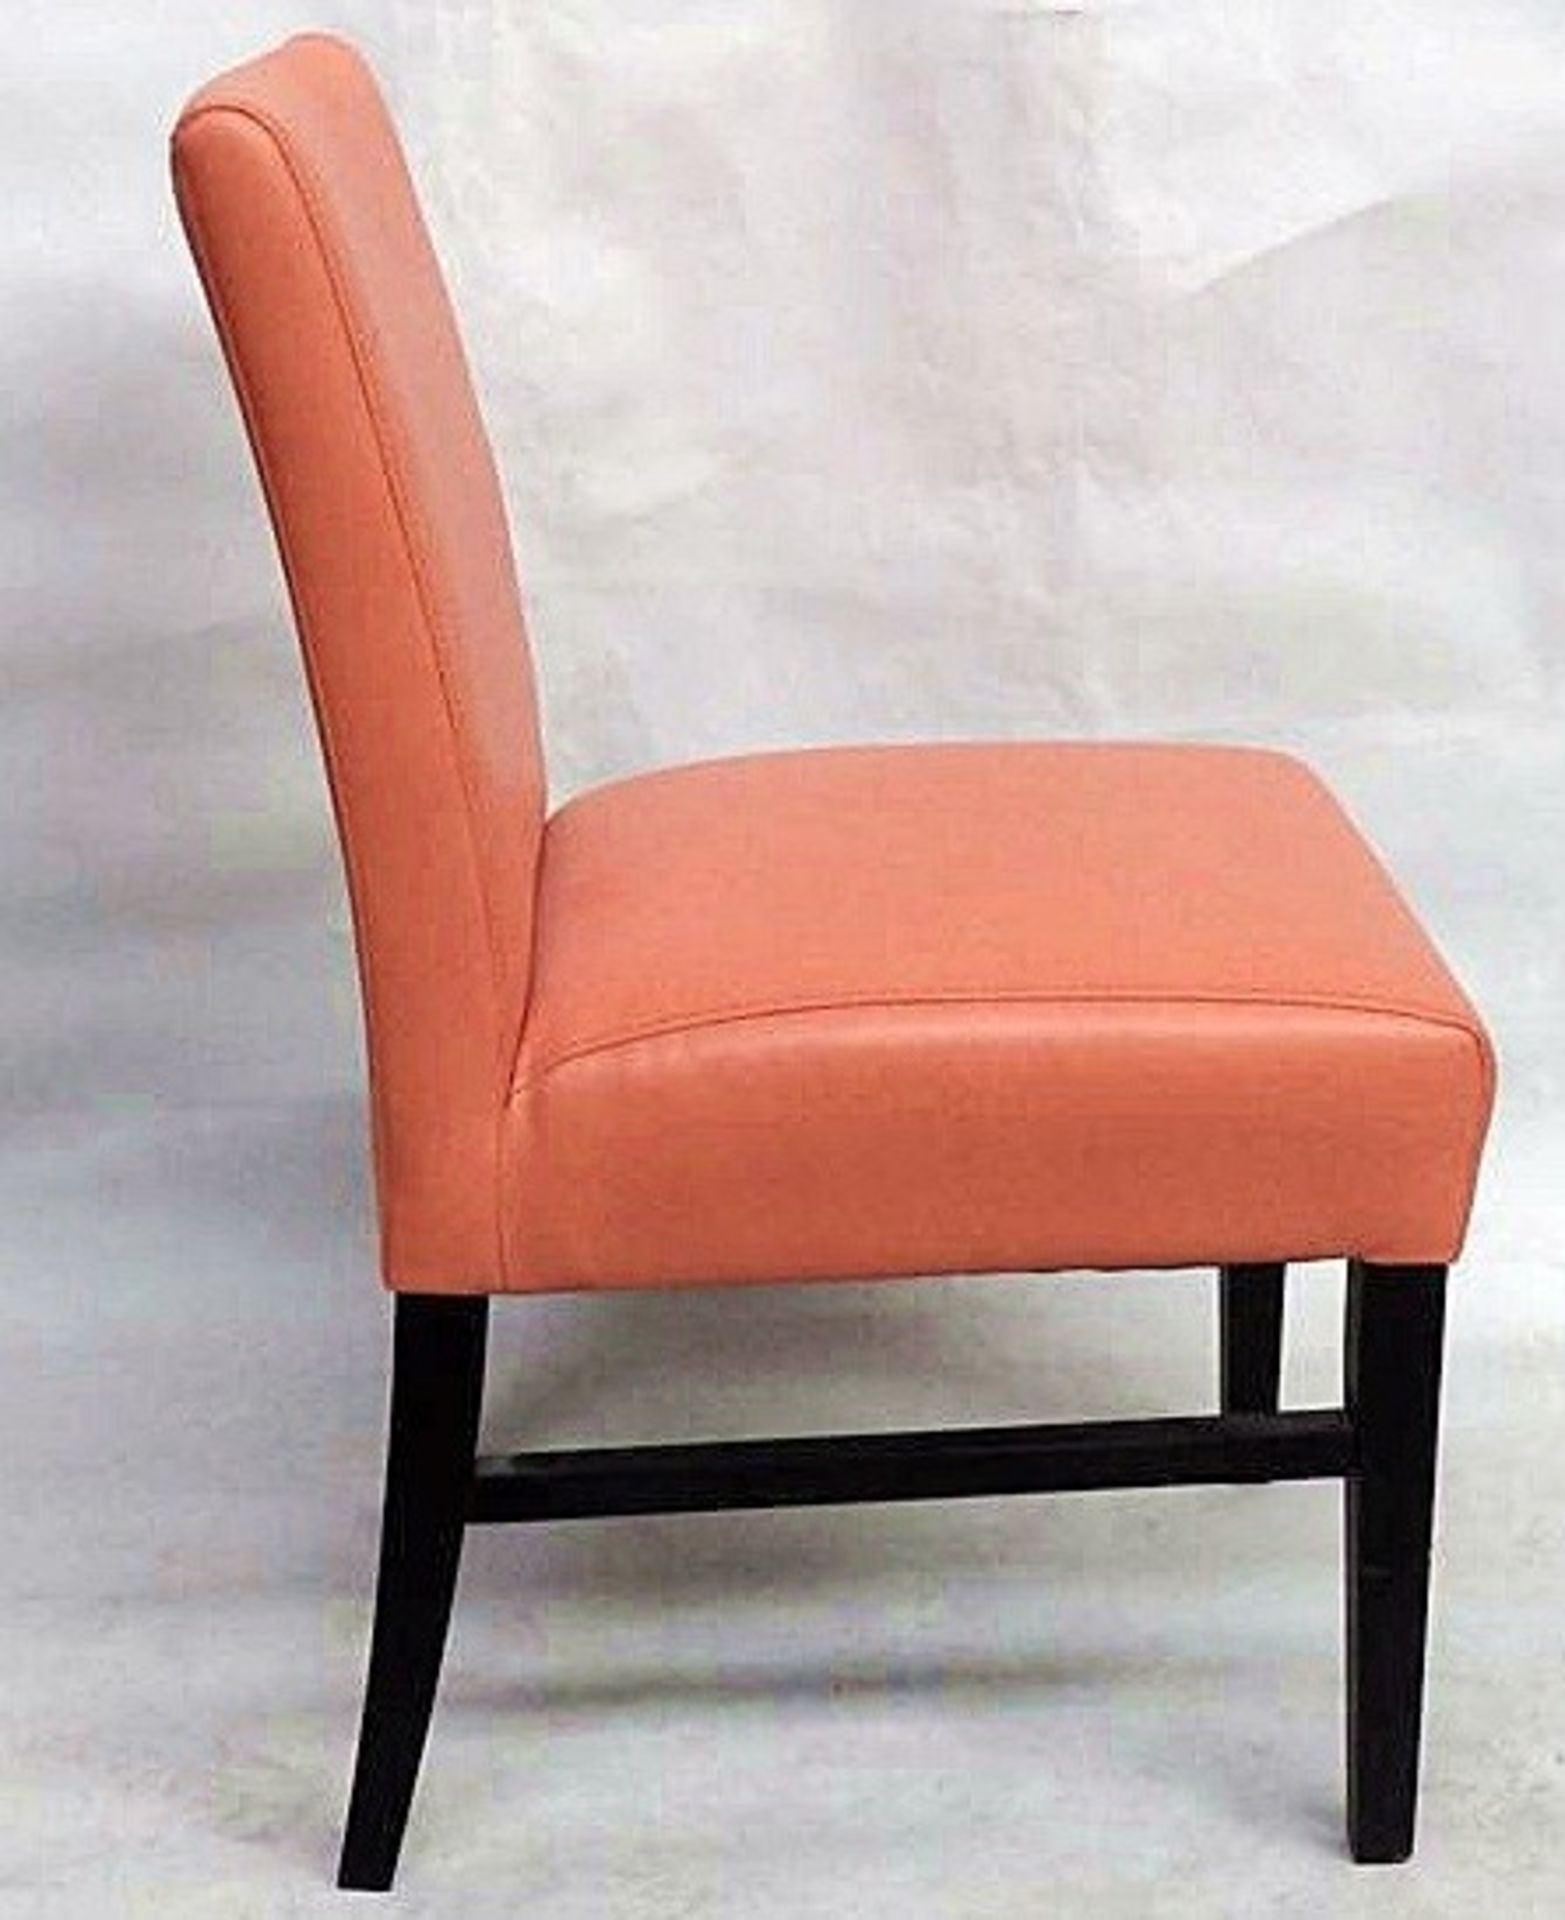 1 x Bright Orange Soft Leather Chair - Handcrafted & Upholstered By British Craftsmen - - Image 3 of 5